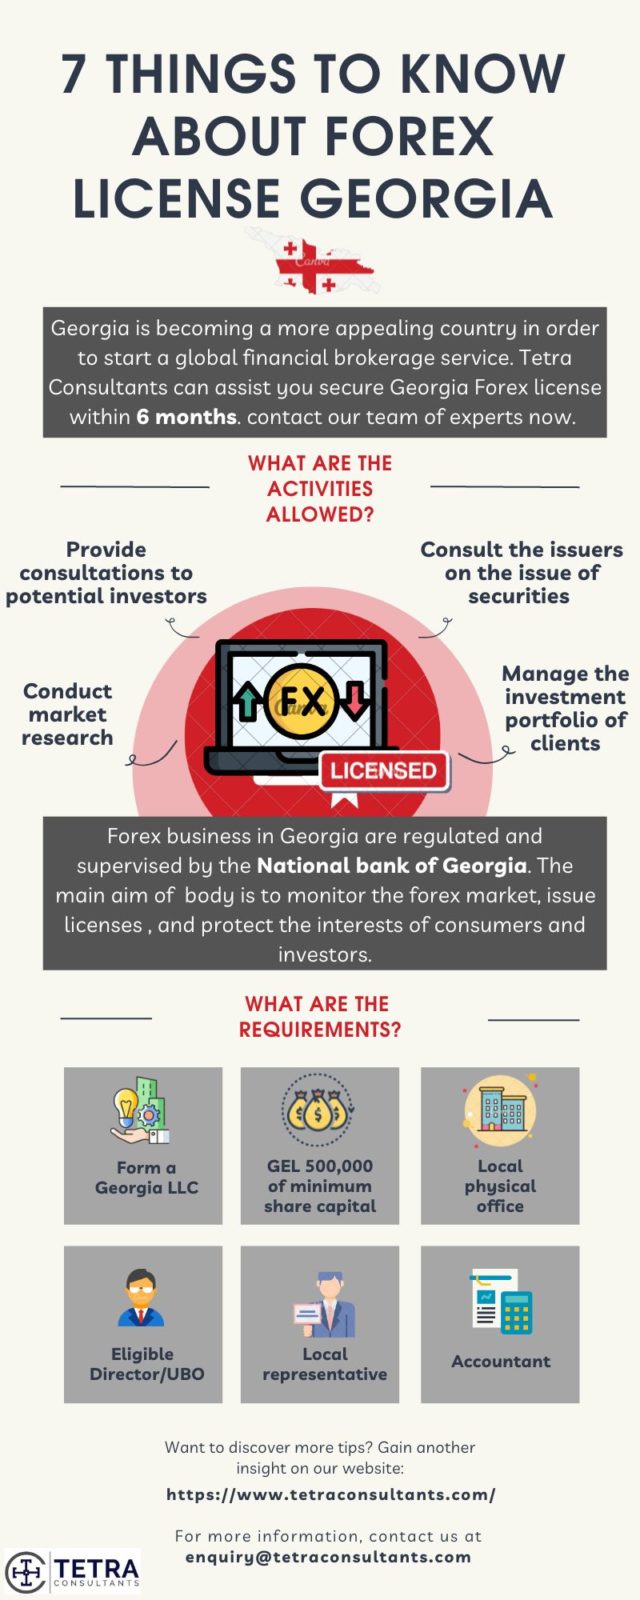 7 things to know about forex license Georgia